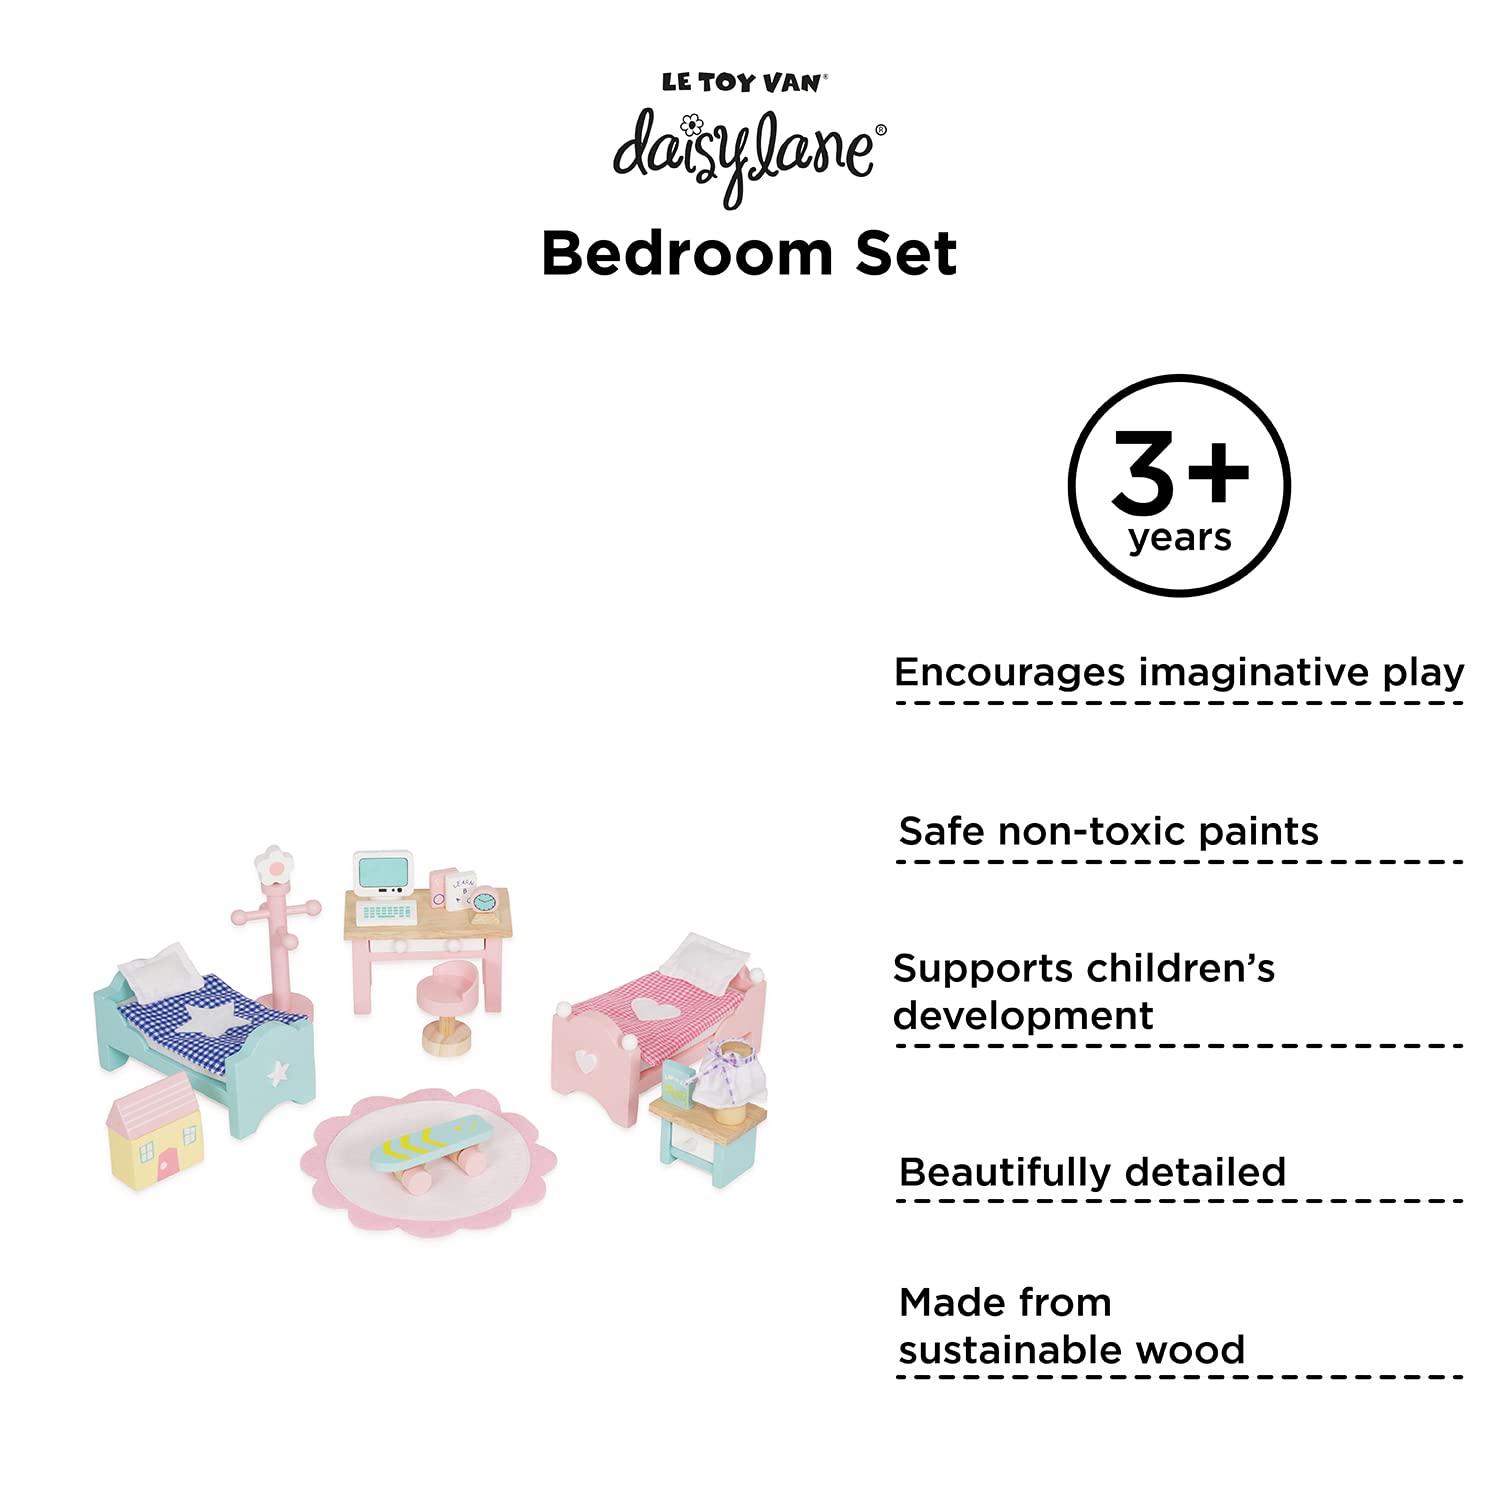 Le Toy Van - SugarPlum Wooden Bedroom Set | Dolls House Accessories Play Set For Dolls Houses | Girls and Boys Doll House Furniture Sets - Suitable For Ages 3+, Daisylane Child Bedroom (ME061)